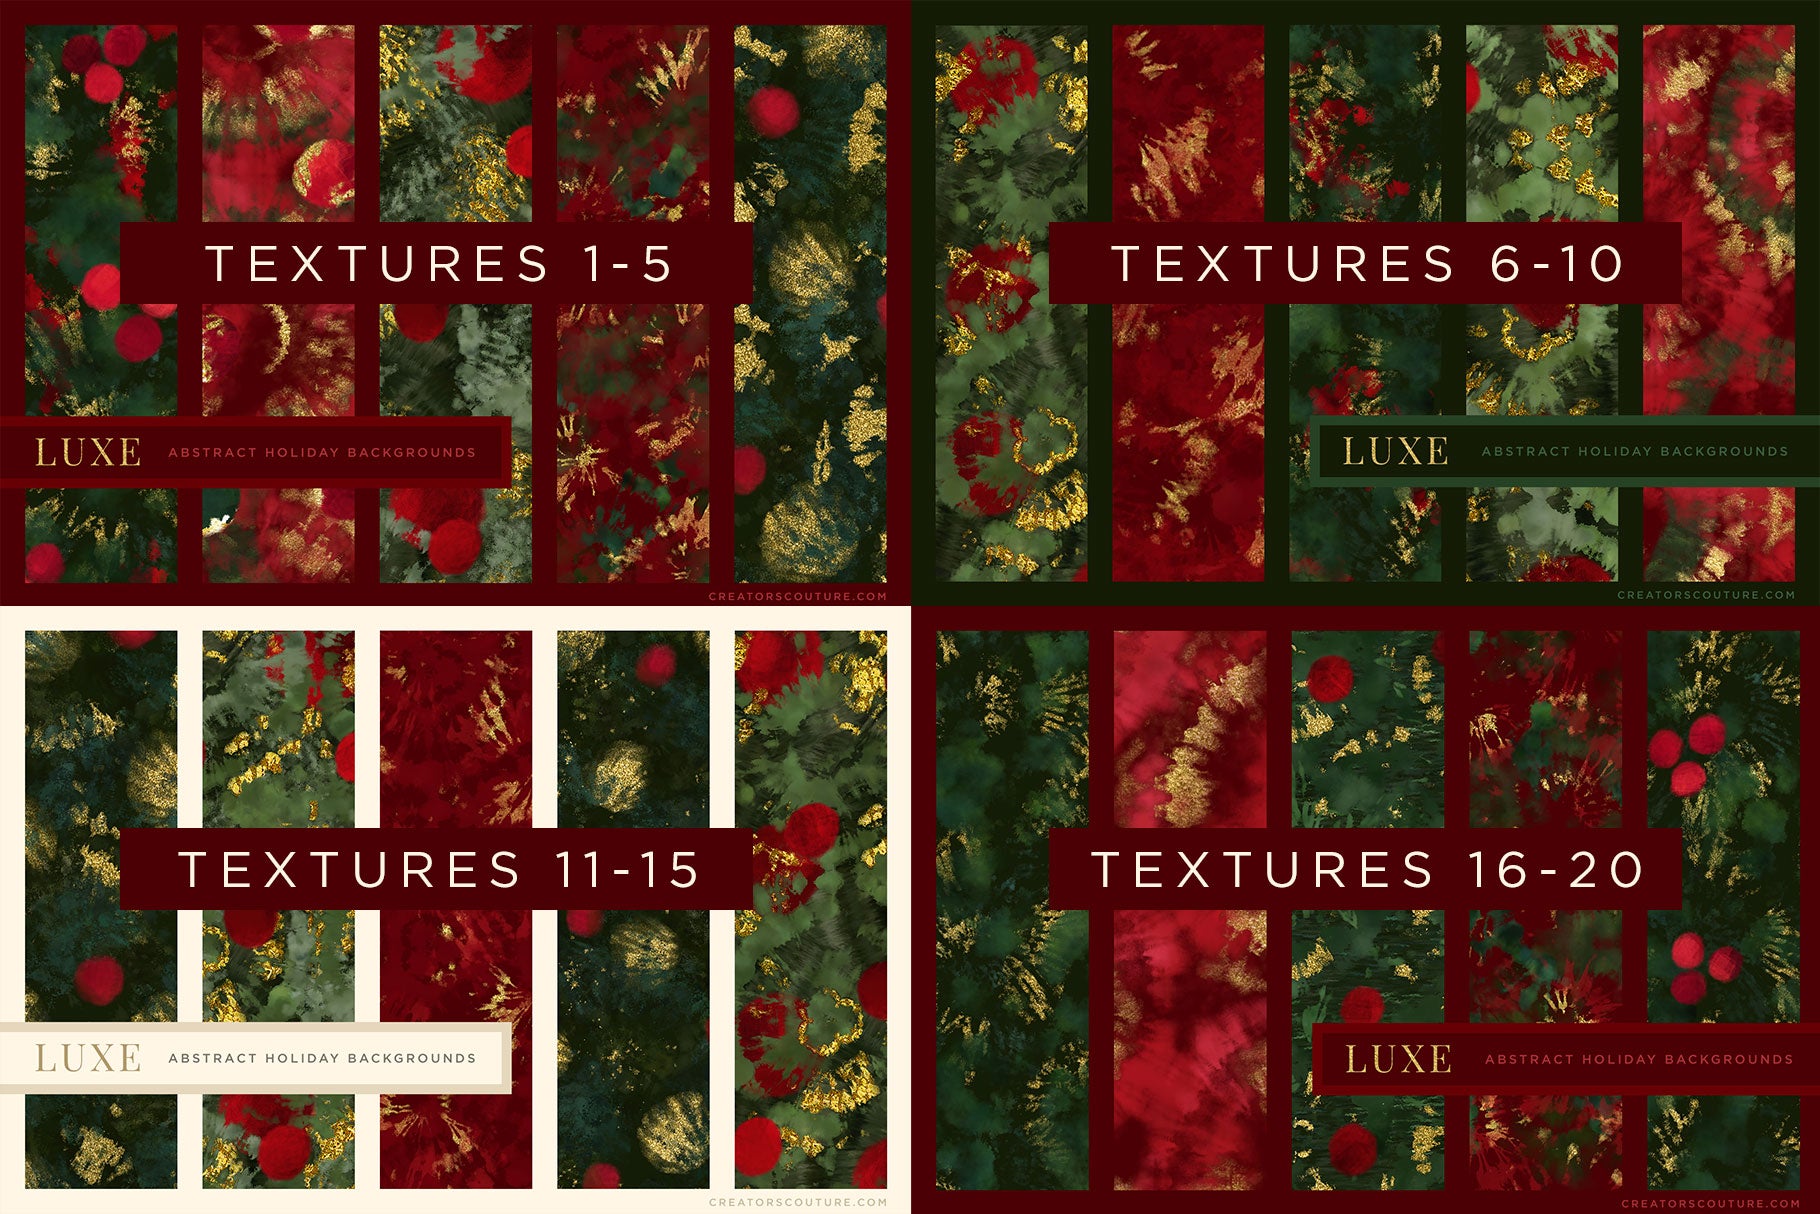 Luxe Christmas: Abstract Holiday Painted Backgrounds, reference chart